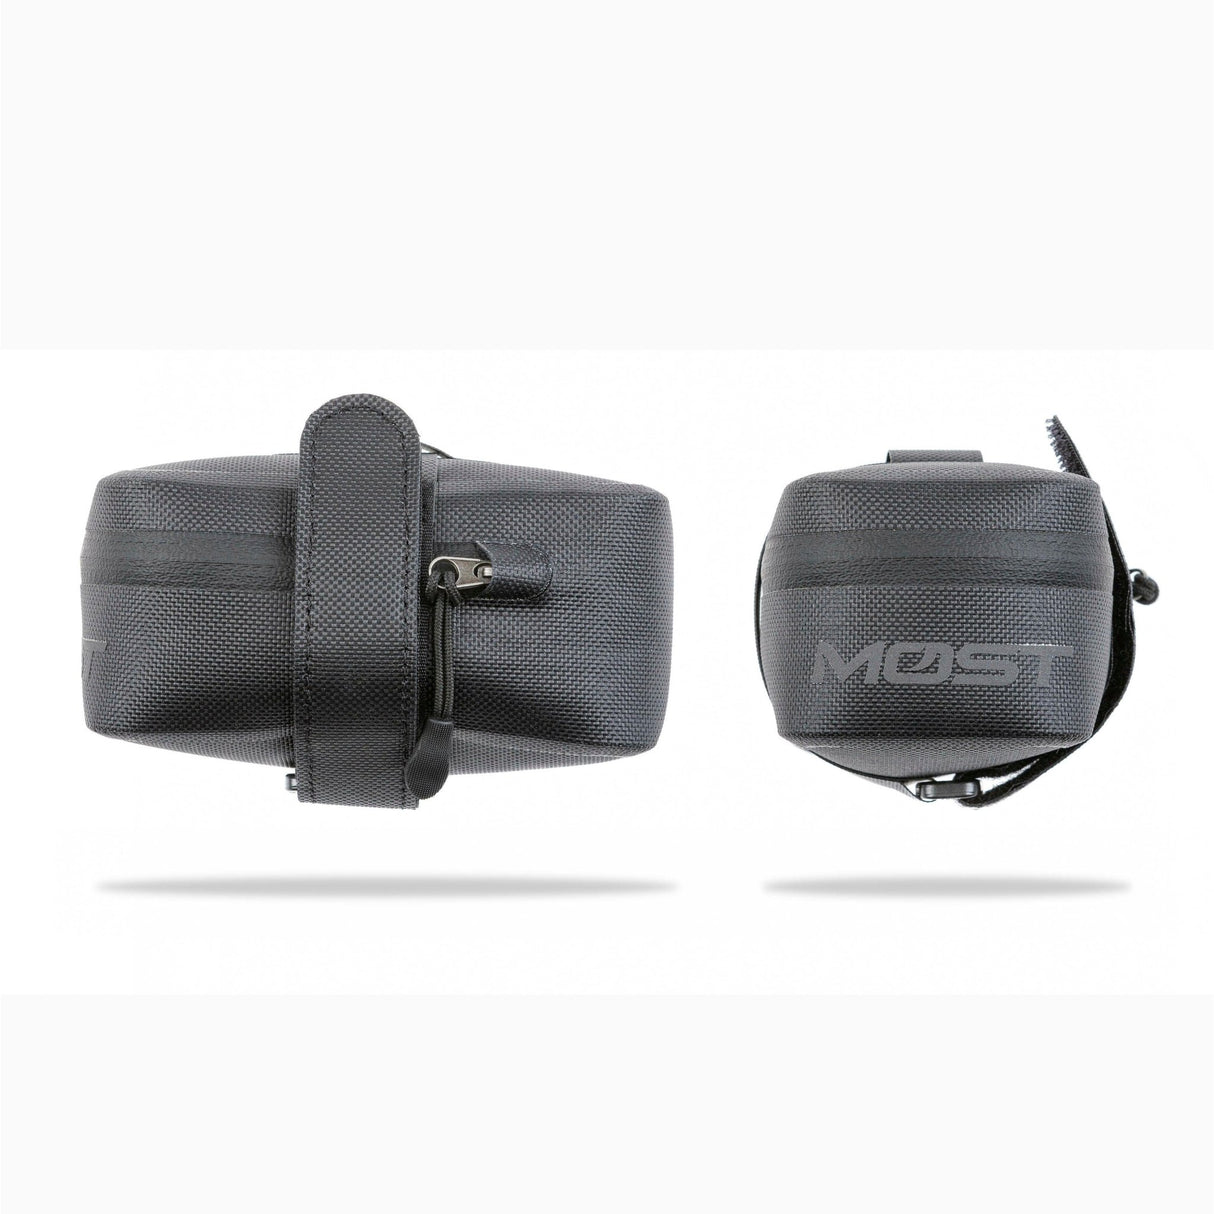 MOST The Case Waterproof Saddle bag | Strictly Bicycles